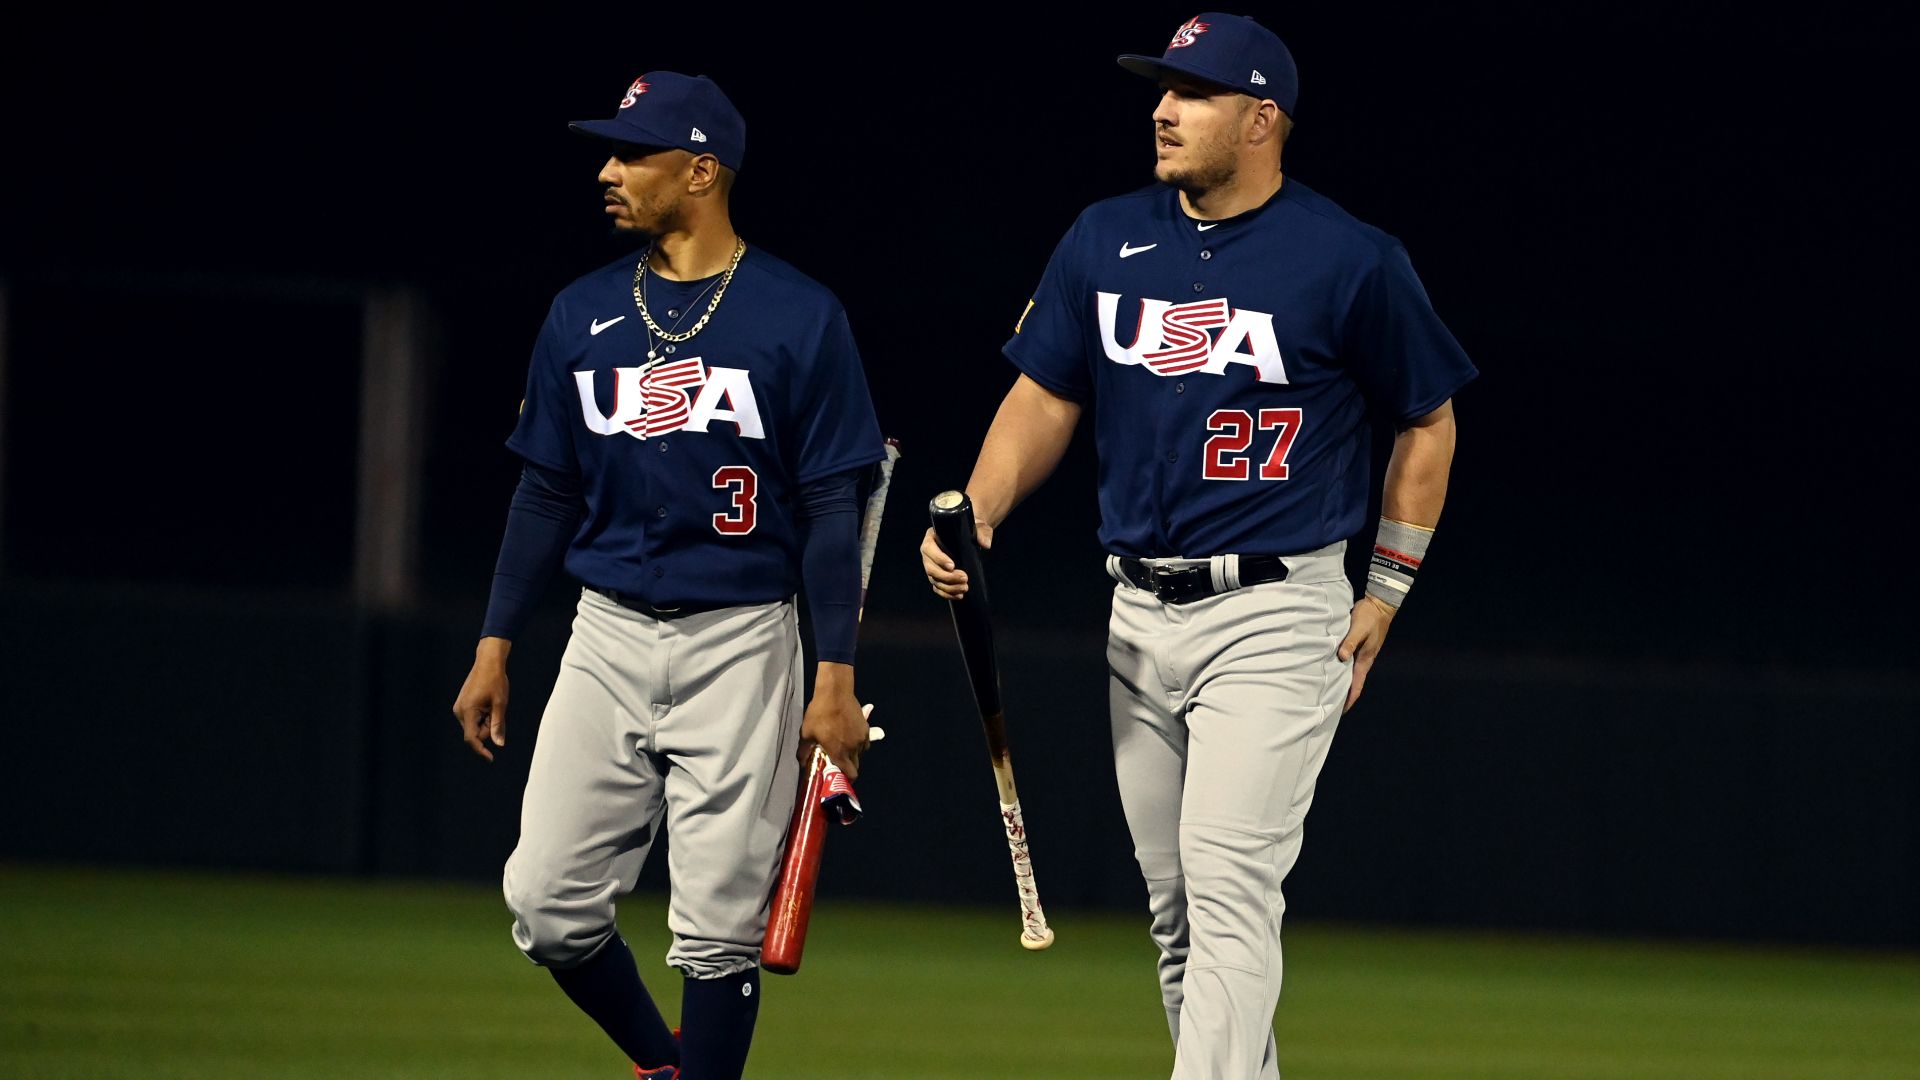 Trea Turner, J.T. Realmuto, and Kyle Schwarber look back on WBC